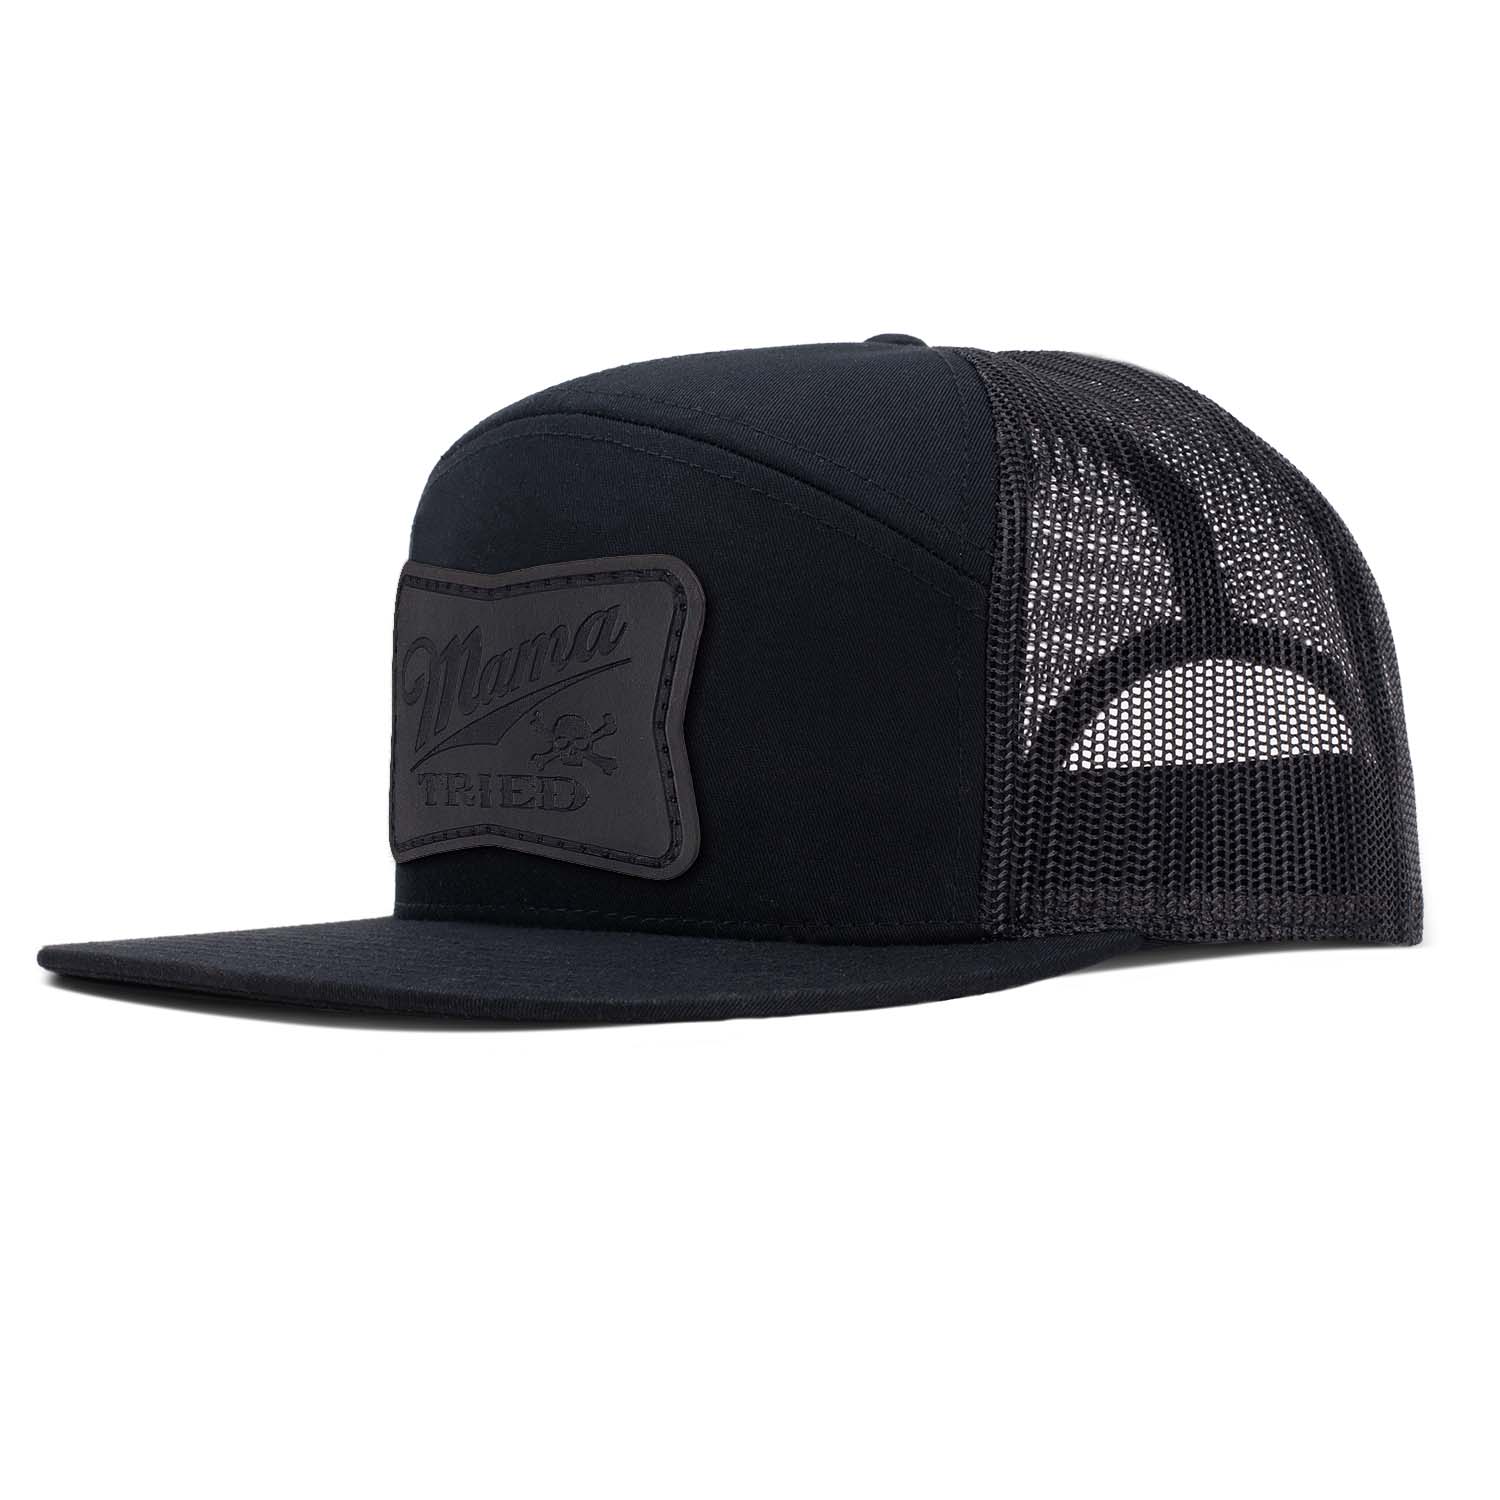 Revolution Mfg all black 7 panel trucker with black mesh featuring our full grain leather Mama Tried patch in all black on the seamless front panel